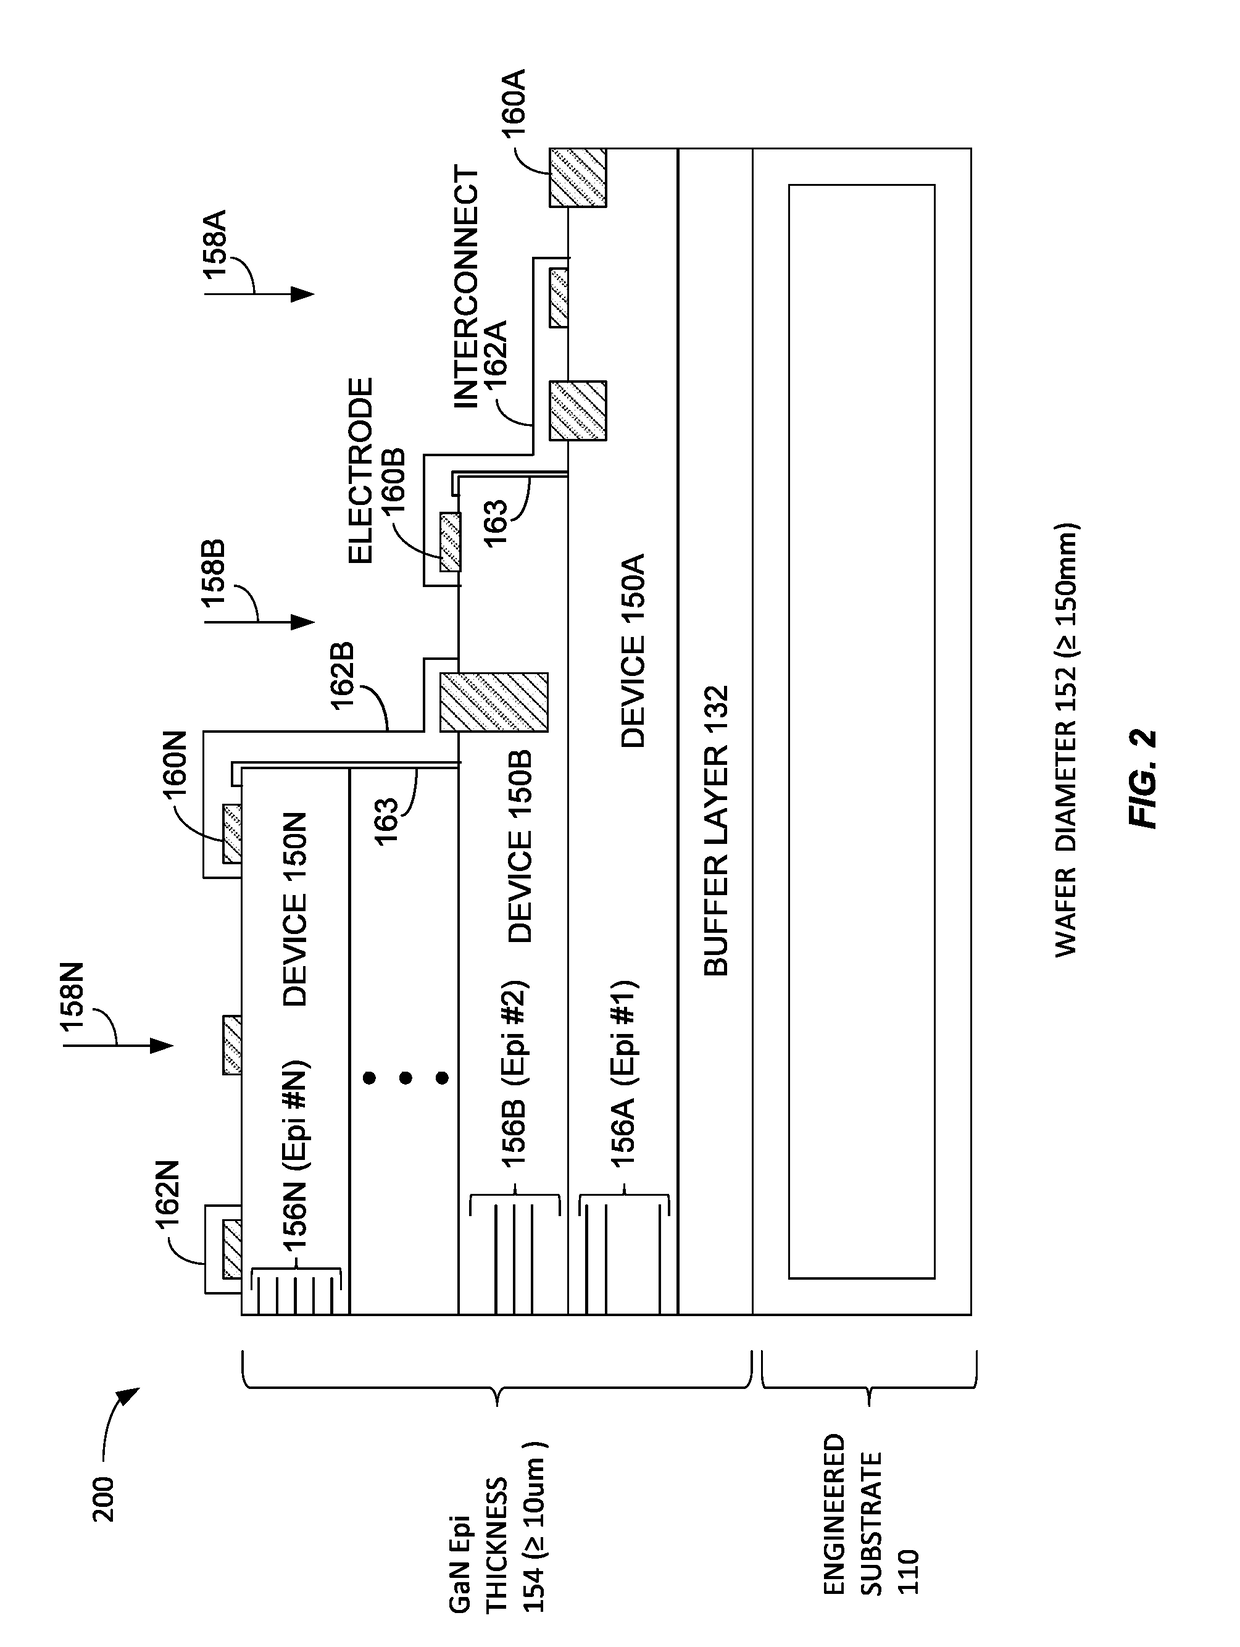 Wide band gap device integrated circuit architecture on engineered substrate